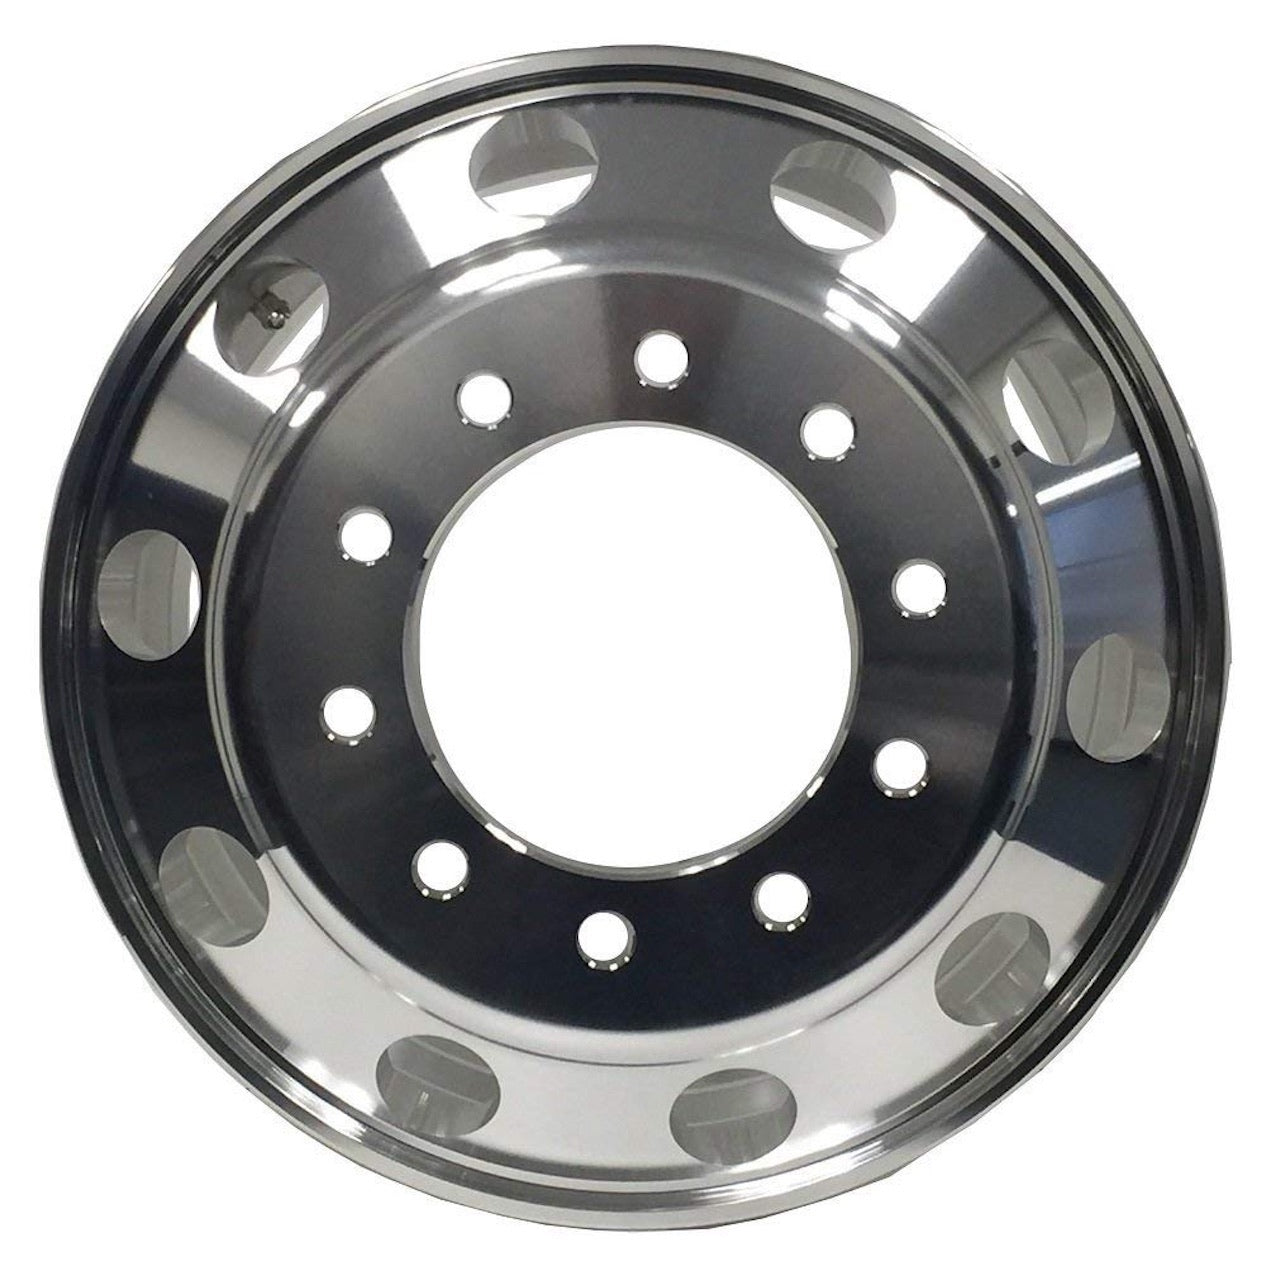 22.5 x 8.25 Forged Aluminum Truck Wheels Machined Bright DDP (Delivered Duty Paid) WHOLESALE PRICE $169/pc 600pcs